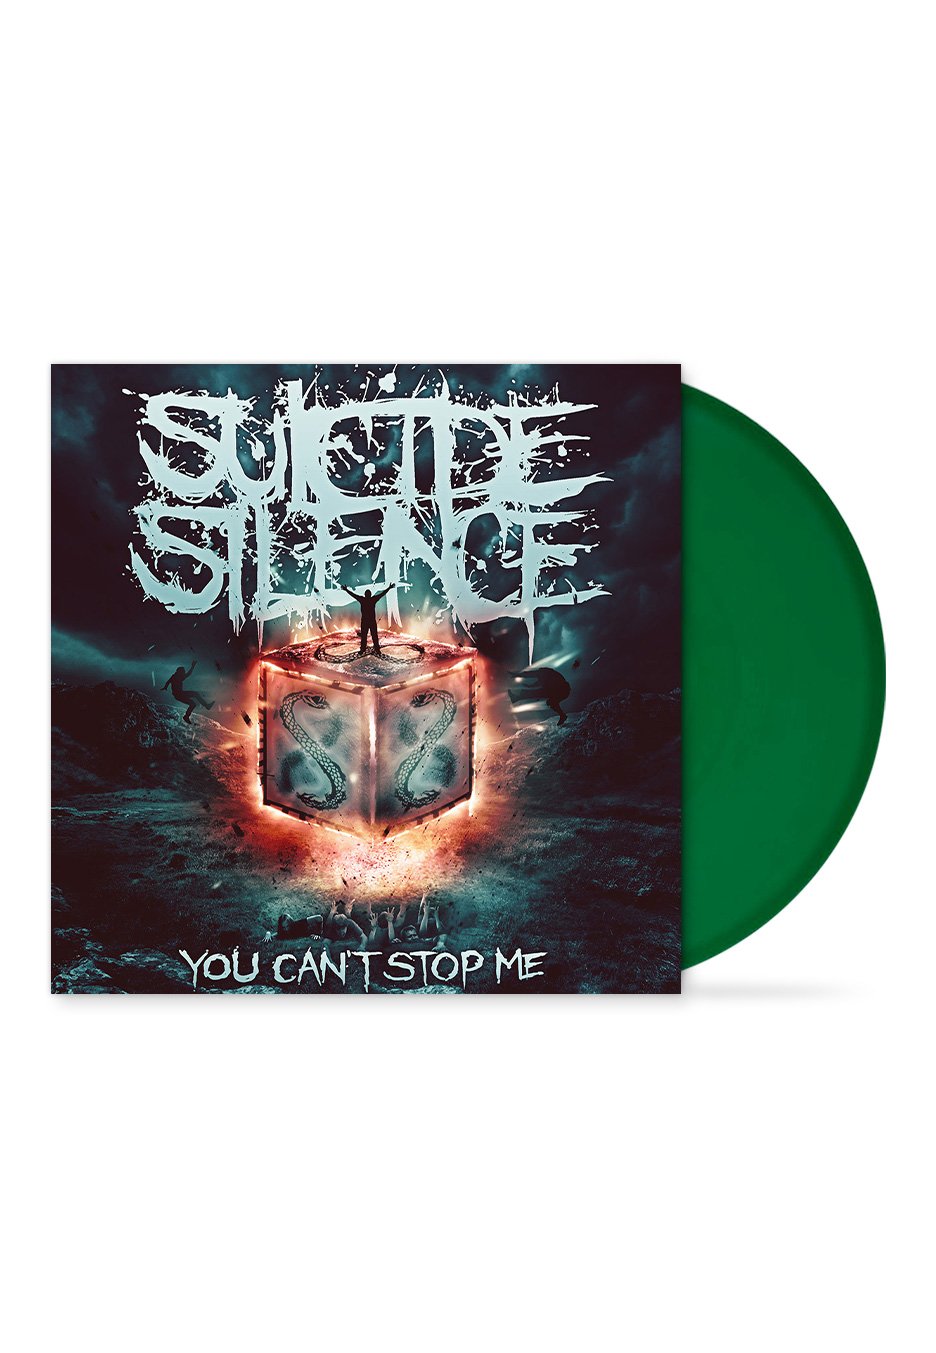 Suicide Silence - You Can't Stop Me Green Ltd. - Colored Vinyl